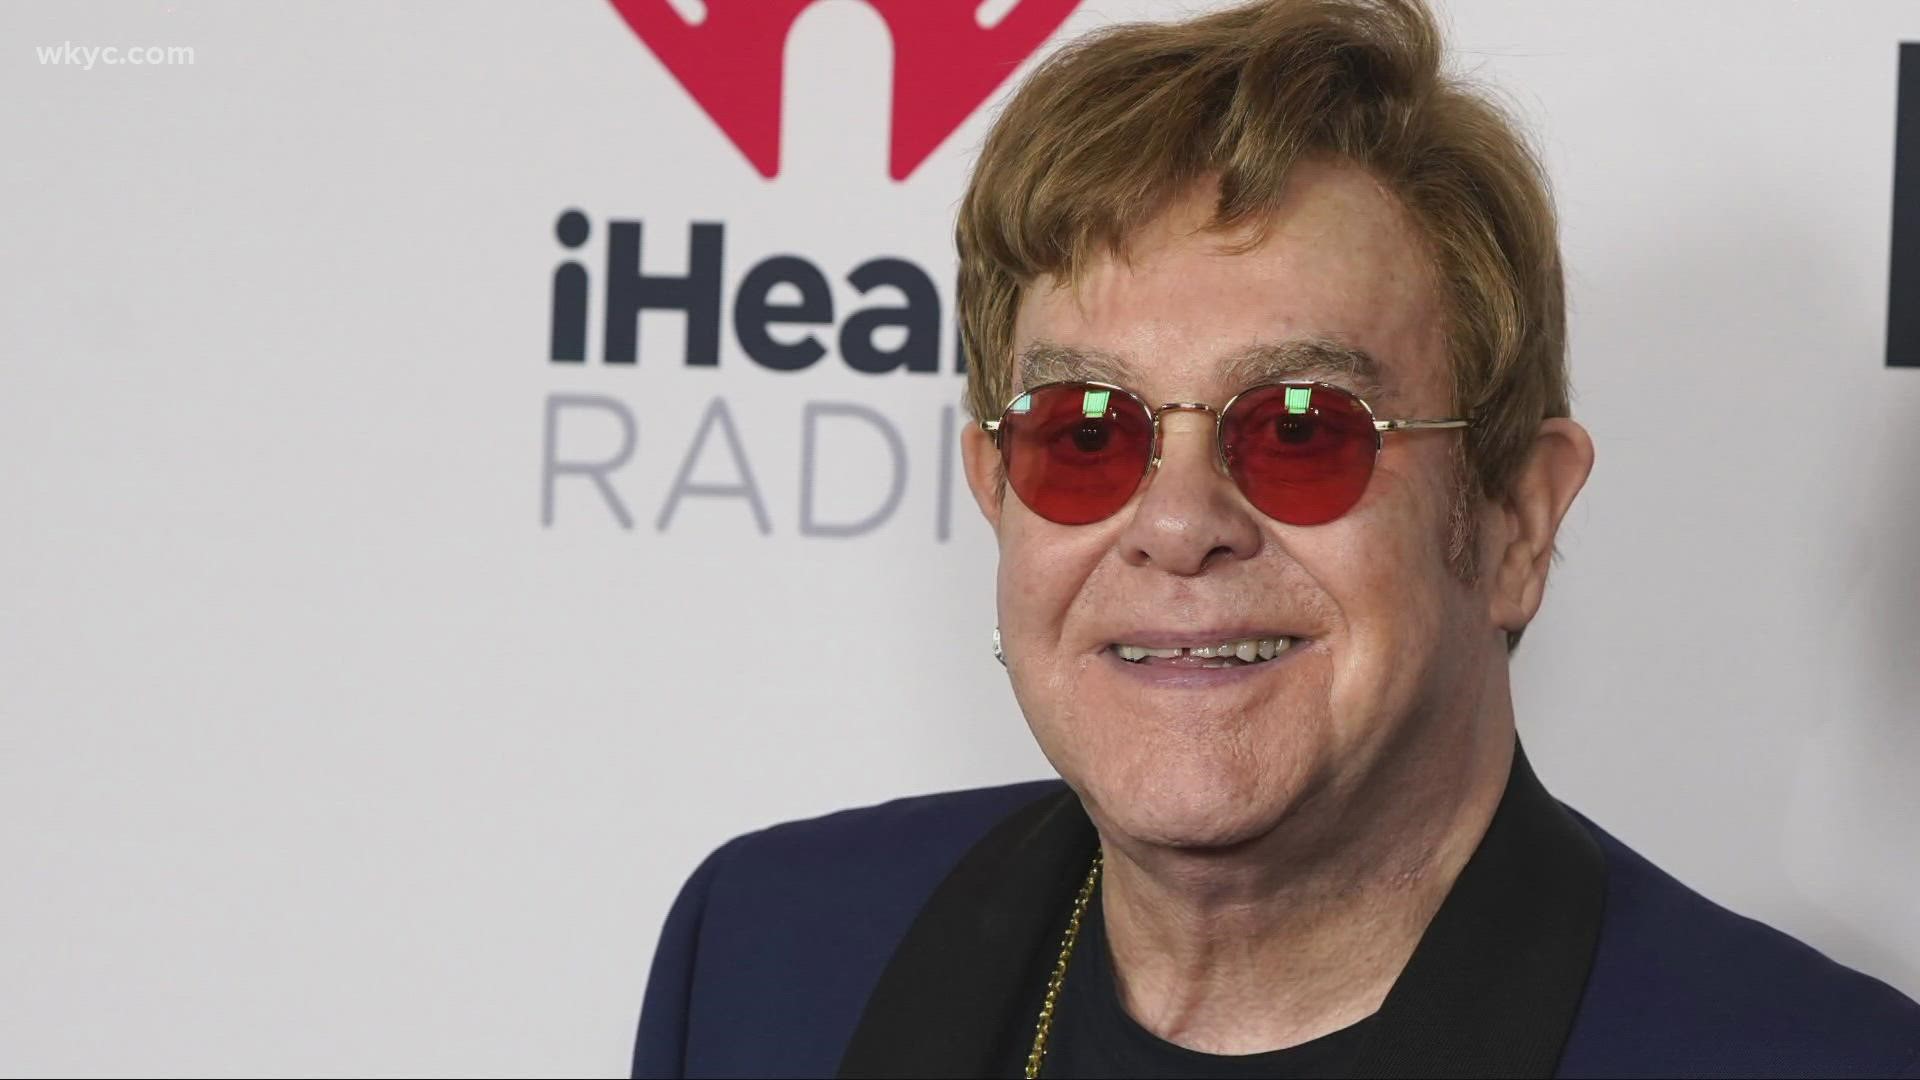 And music icon, Elton John is releasing a new album after being bitten by a creative bug during the pandemic.